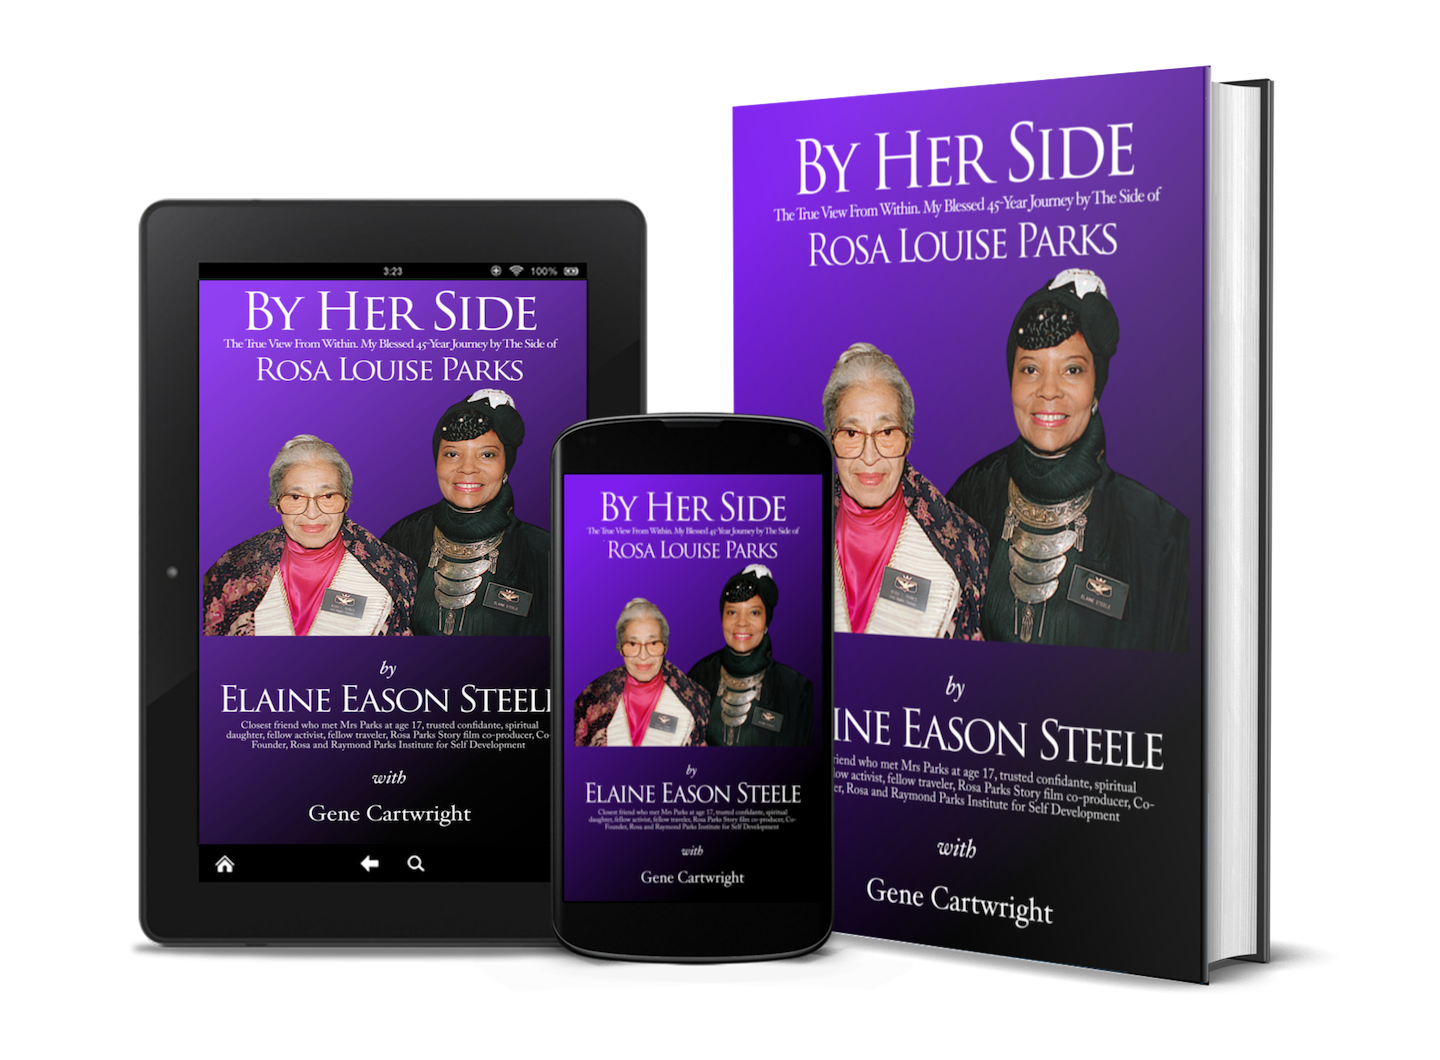 By Her Side. Elaine Eason Steele's 45-year journey by the side of Rosa Louise Parks.